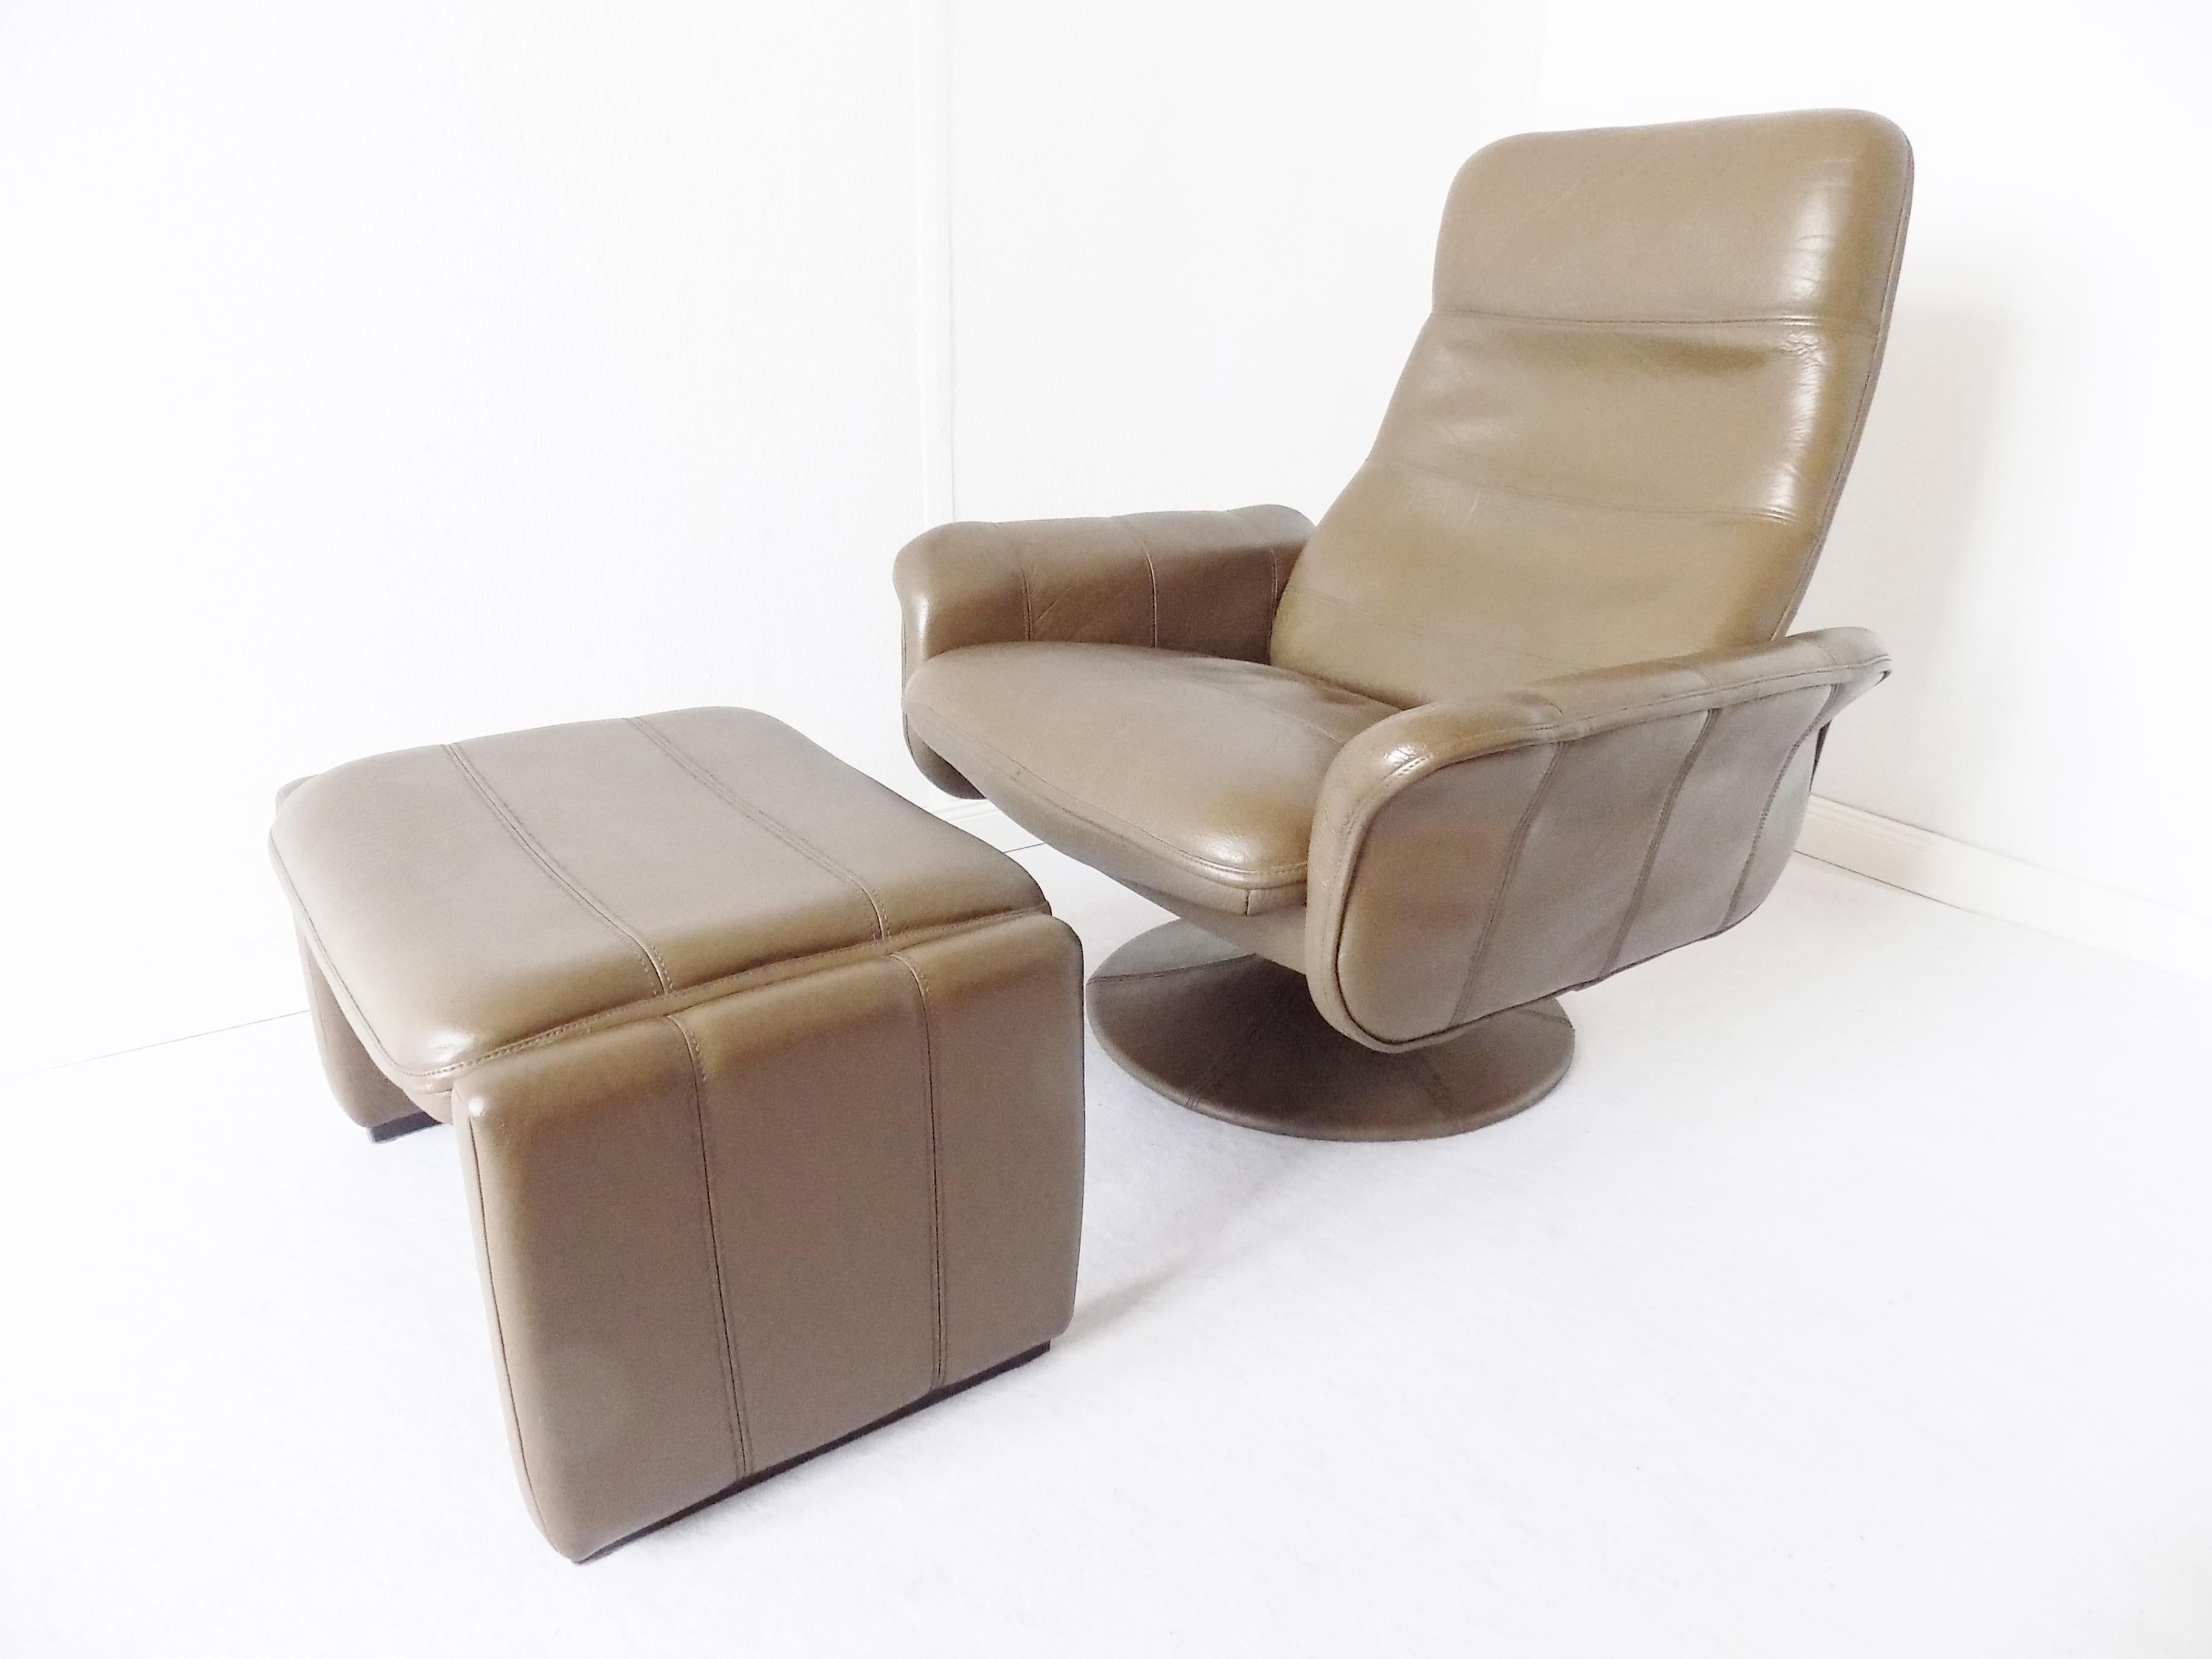 De Sede DS50 Tulip Lounge Chair with Ottoman, mid-century modern, Switzerland

This DS 50 comes in moccabrown leather and is in excellent condition as well as the ottoman coming with the chair. No rips, holes or tears. The DS 50 is an adjustable